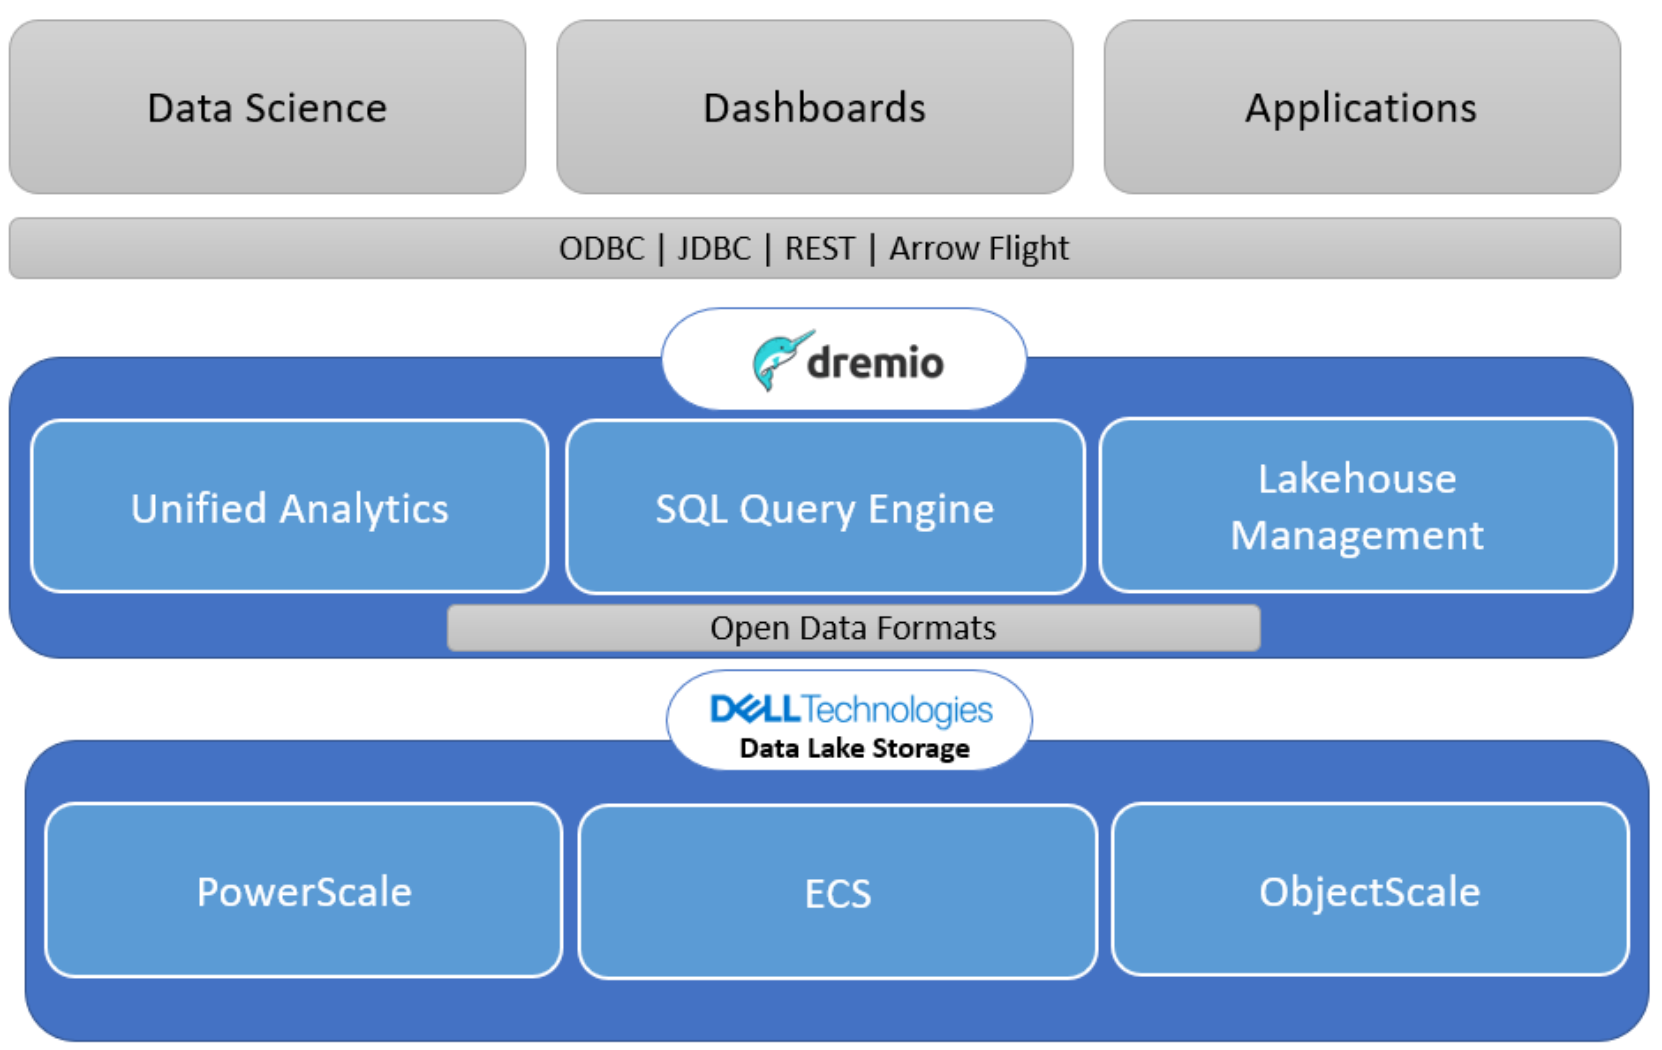 This integrated architecture illustrates how Dremio can leverage Dell PowerScale, ECS and ObjectScale as Data sources from which it retrieves and analyzes data. Dremio's data virtualization layer can connect to Dell Storage to access and query the object storage data, providing users with a unified view of data across different sources utilizing various data formats and tools.